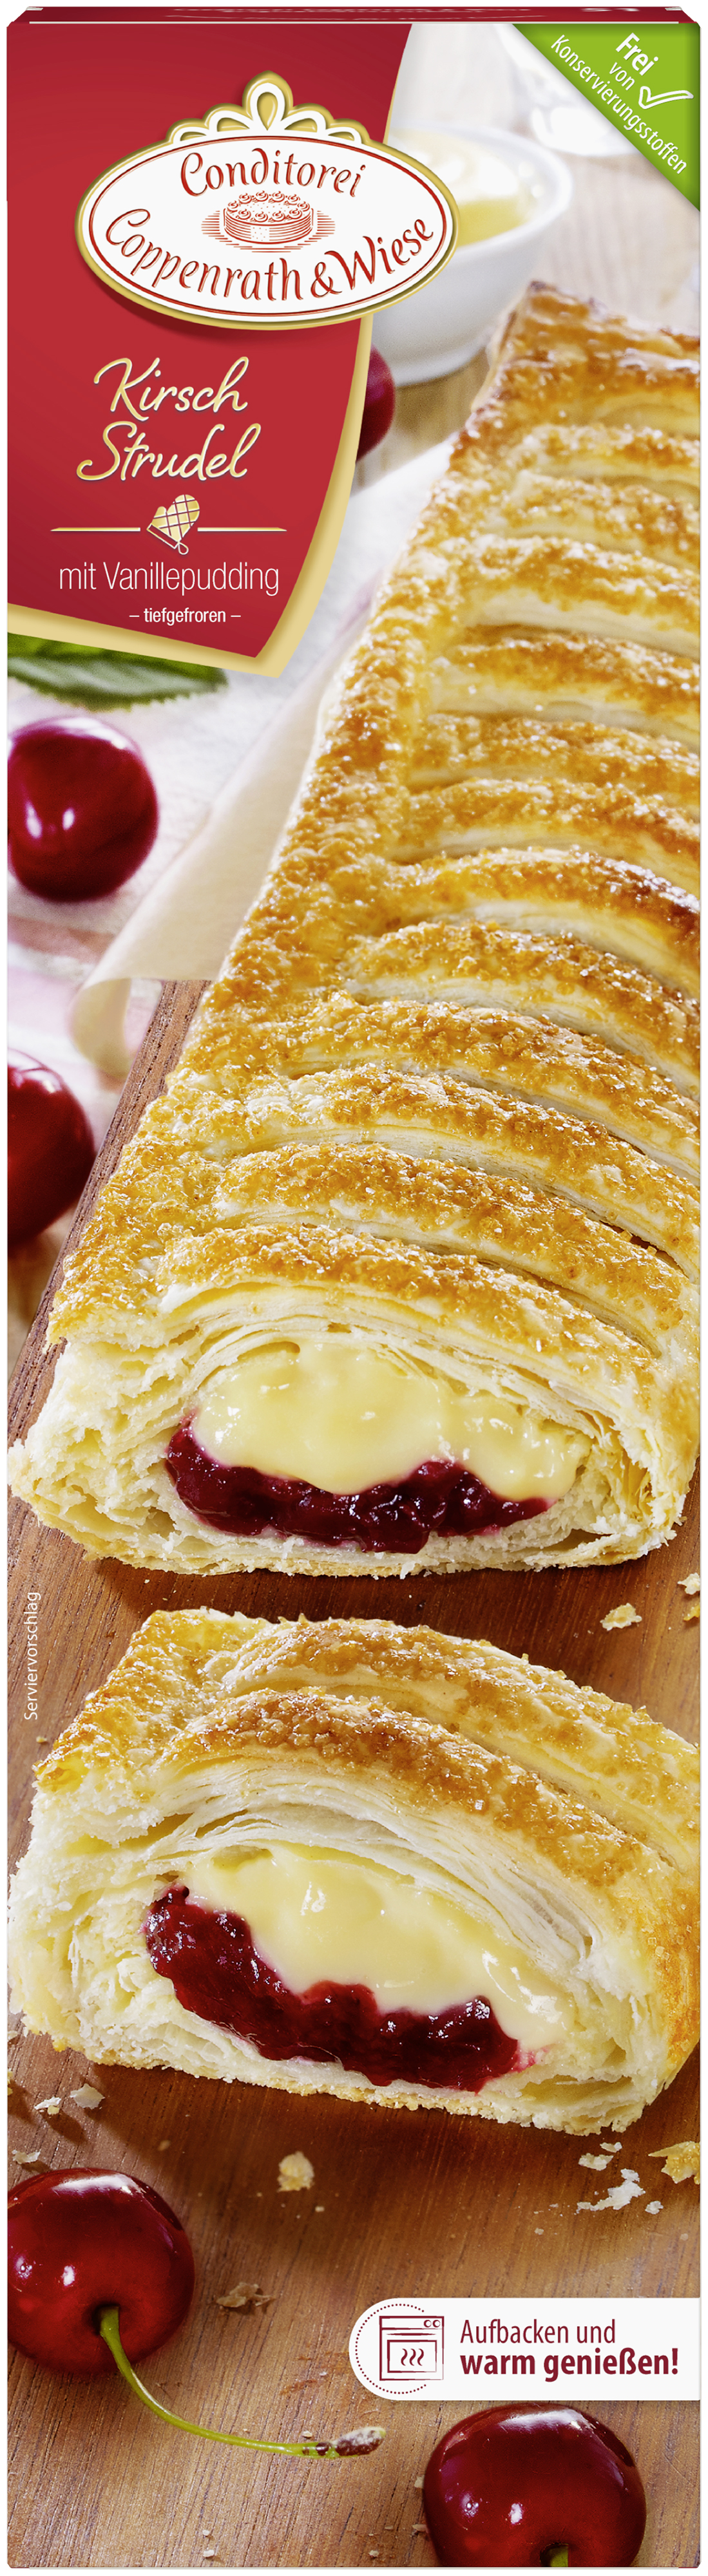 Bread Kirsch-Strudel mynetfair Tobacco Products Coppenrath / Vanillepudding Bakery KG Beverage Food grams) & · / / Products Sweet mit Wiese Bakery Conditorei (600